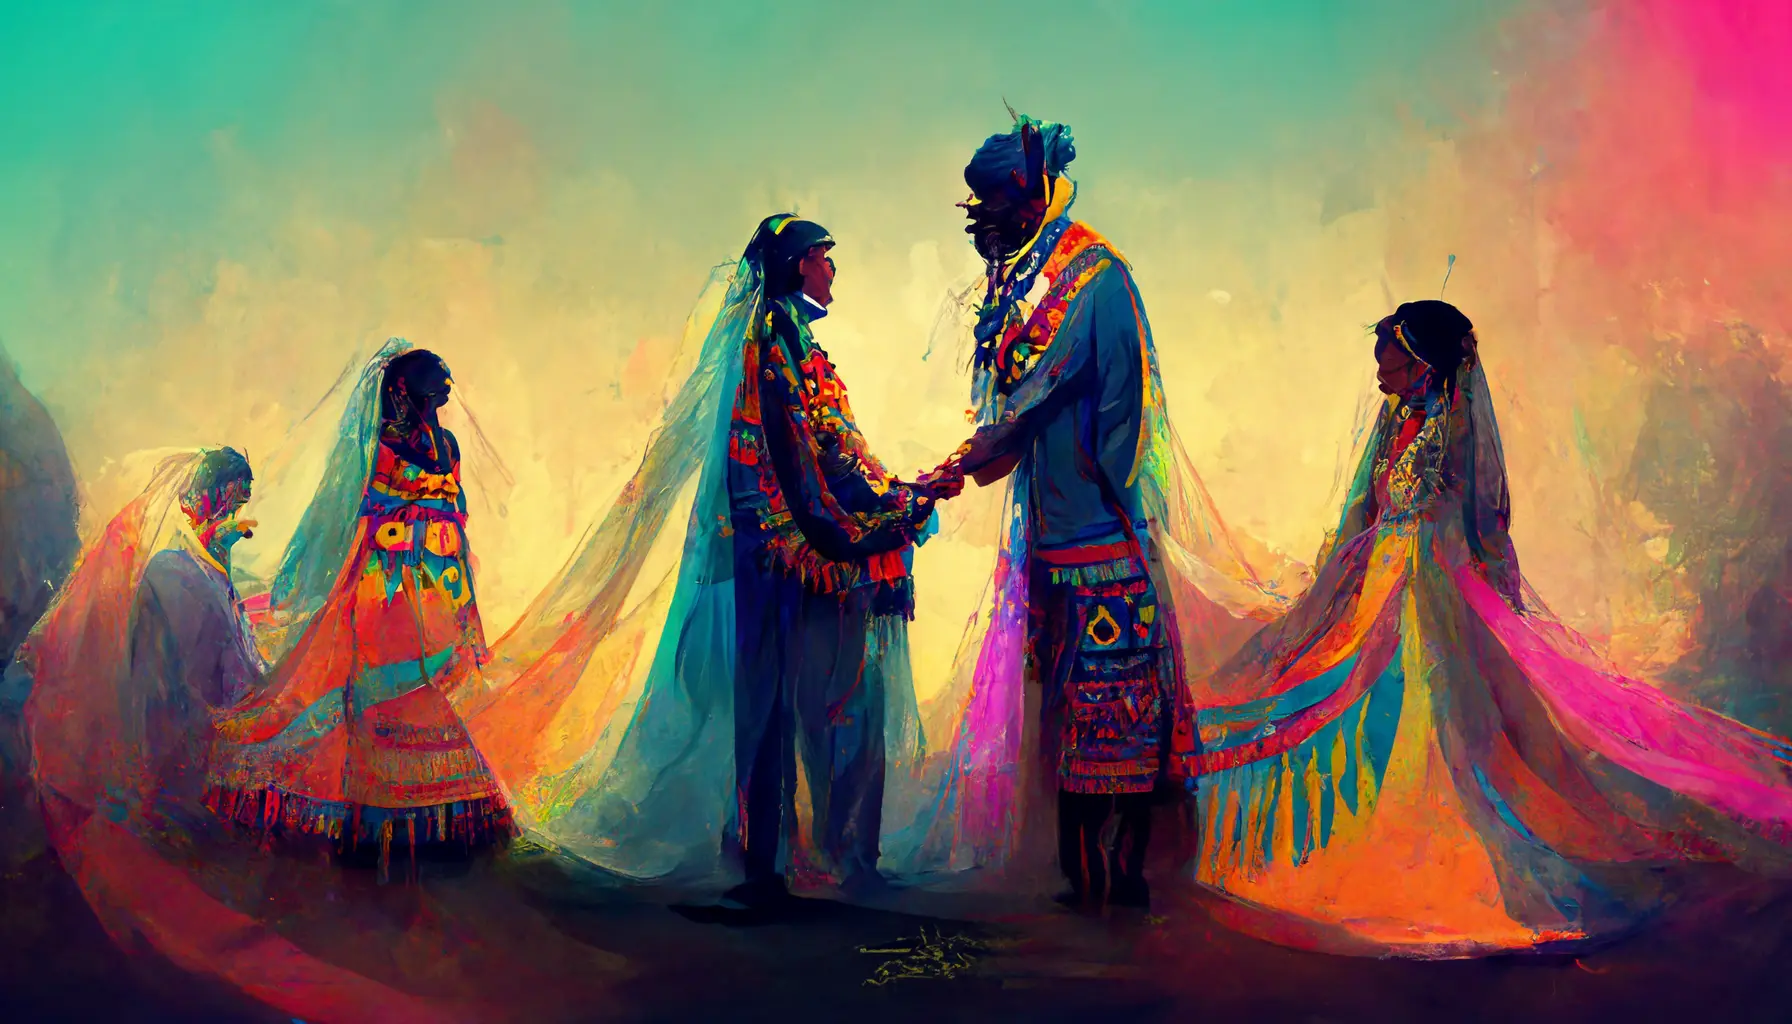 An impressionist painting of a wedding with highly decorated and vibrantly coloured clothing. The bride and groom face each other in bright clothing.